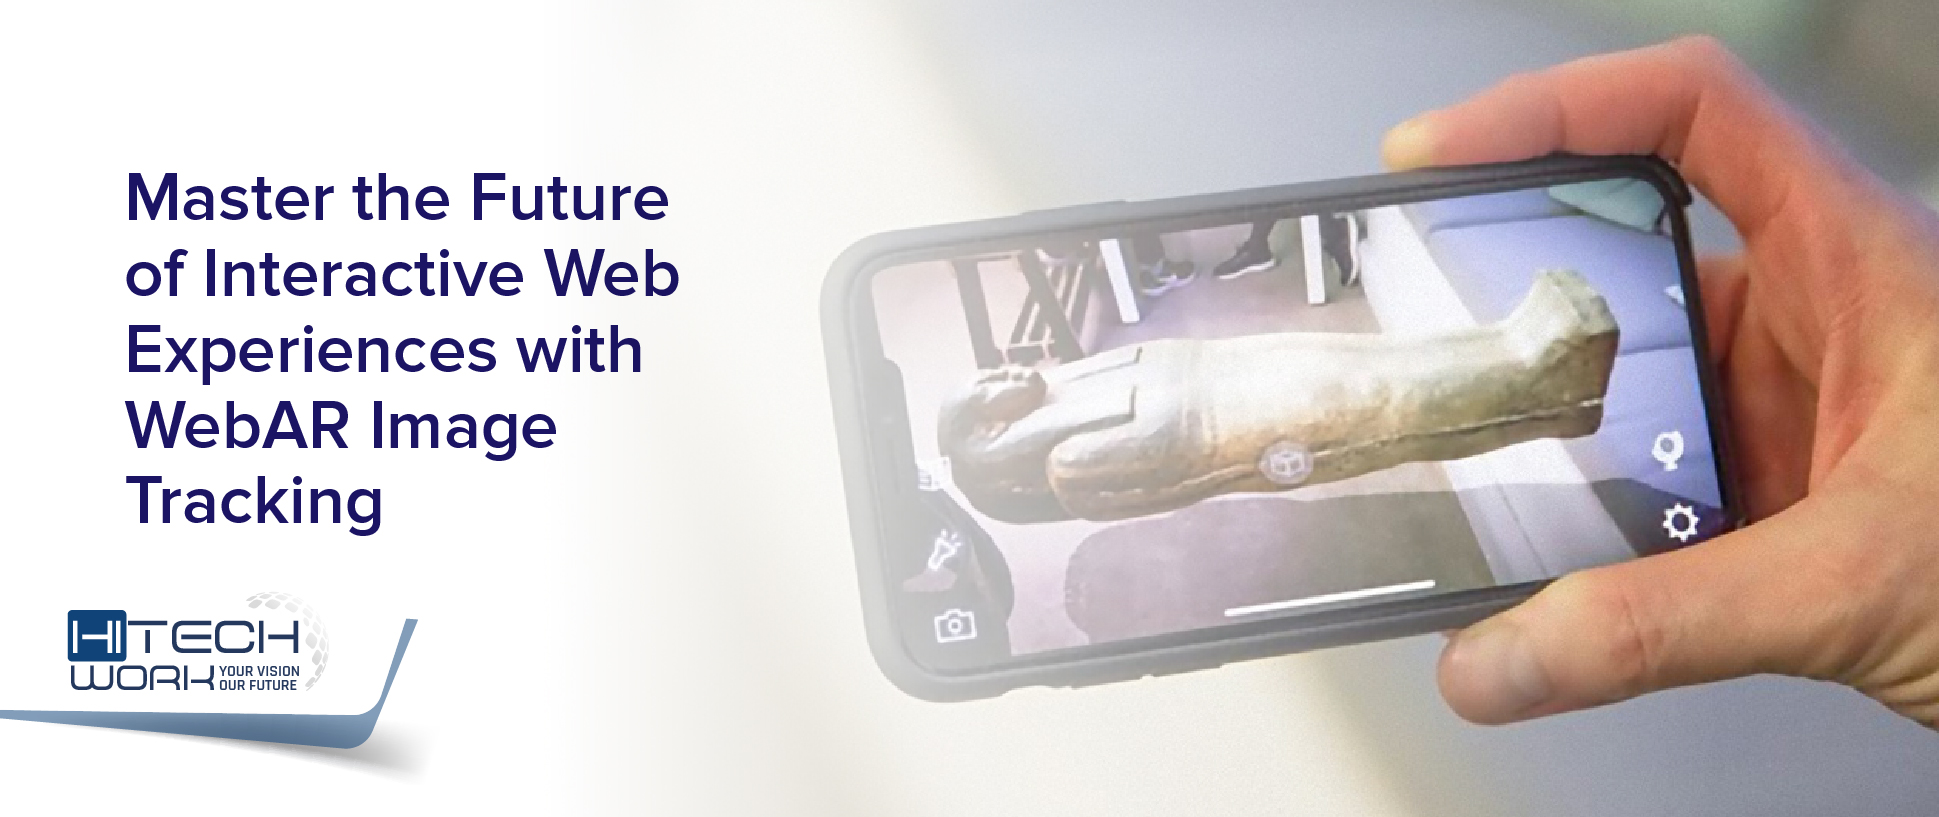 Master the Future of Interactive Web Experiences with WebAR Image Tracking